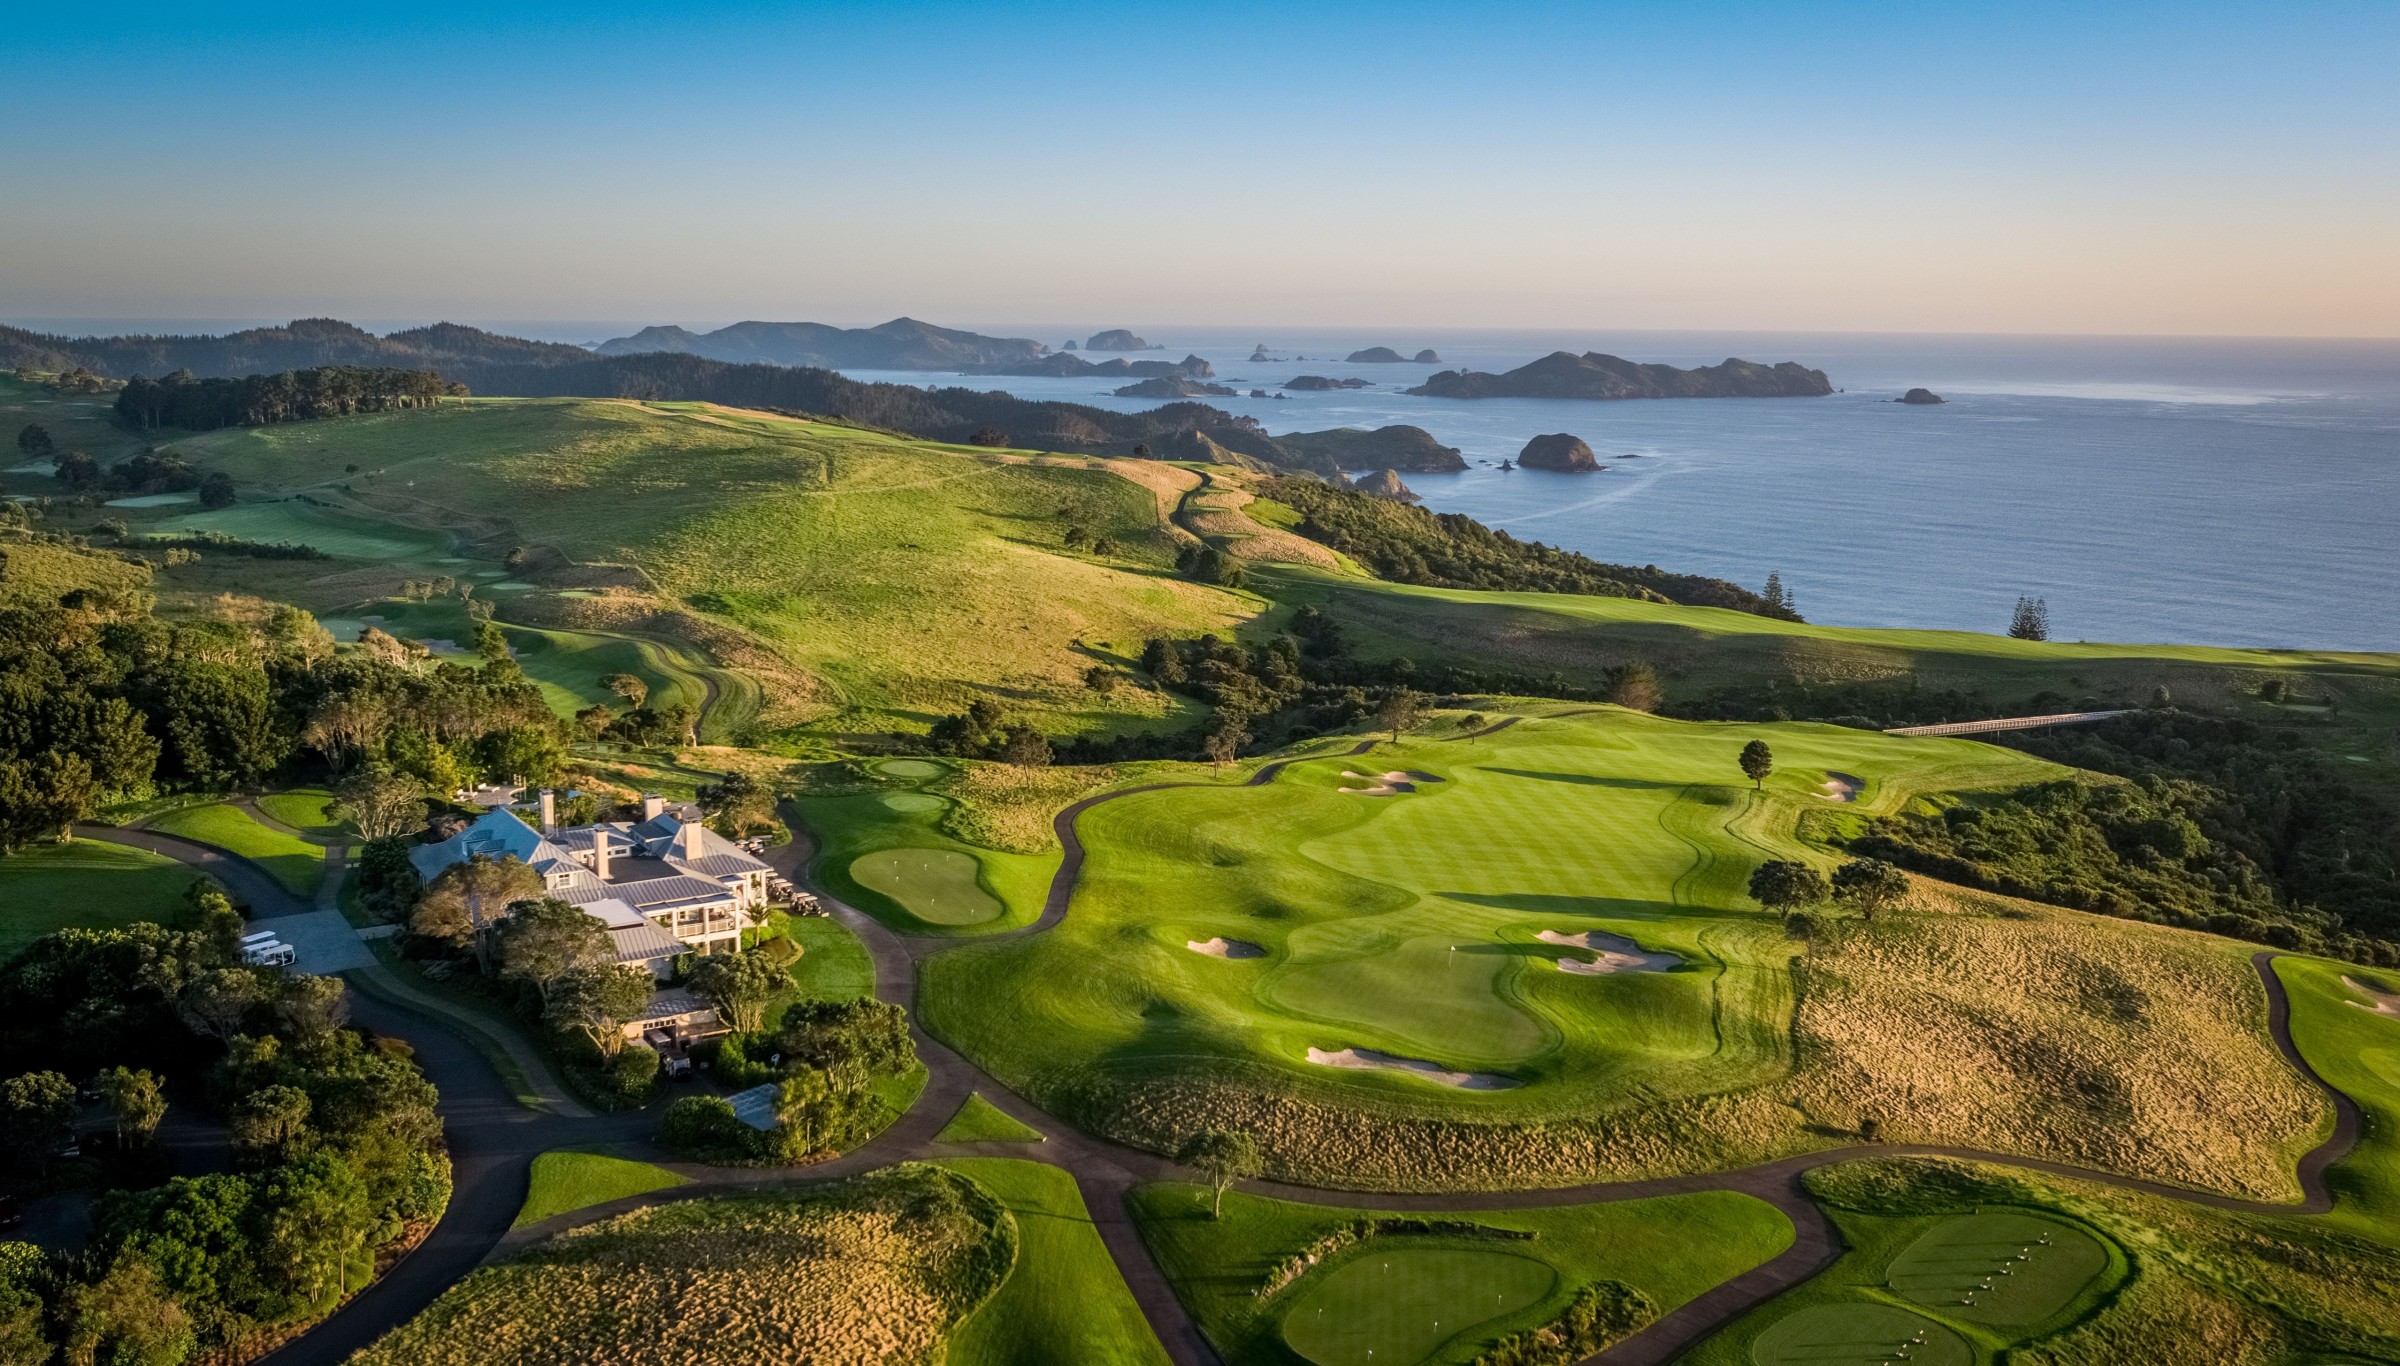 Announcing the Winter Special offer at Rosewood Kauri Cliffs, Rosewood Cape Kidnappers & Rosewood Matakauri